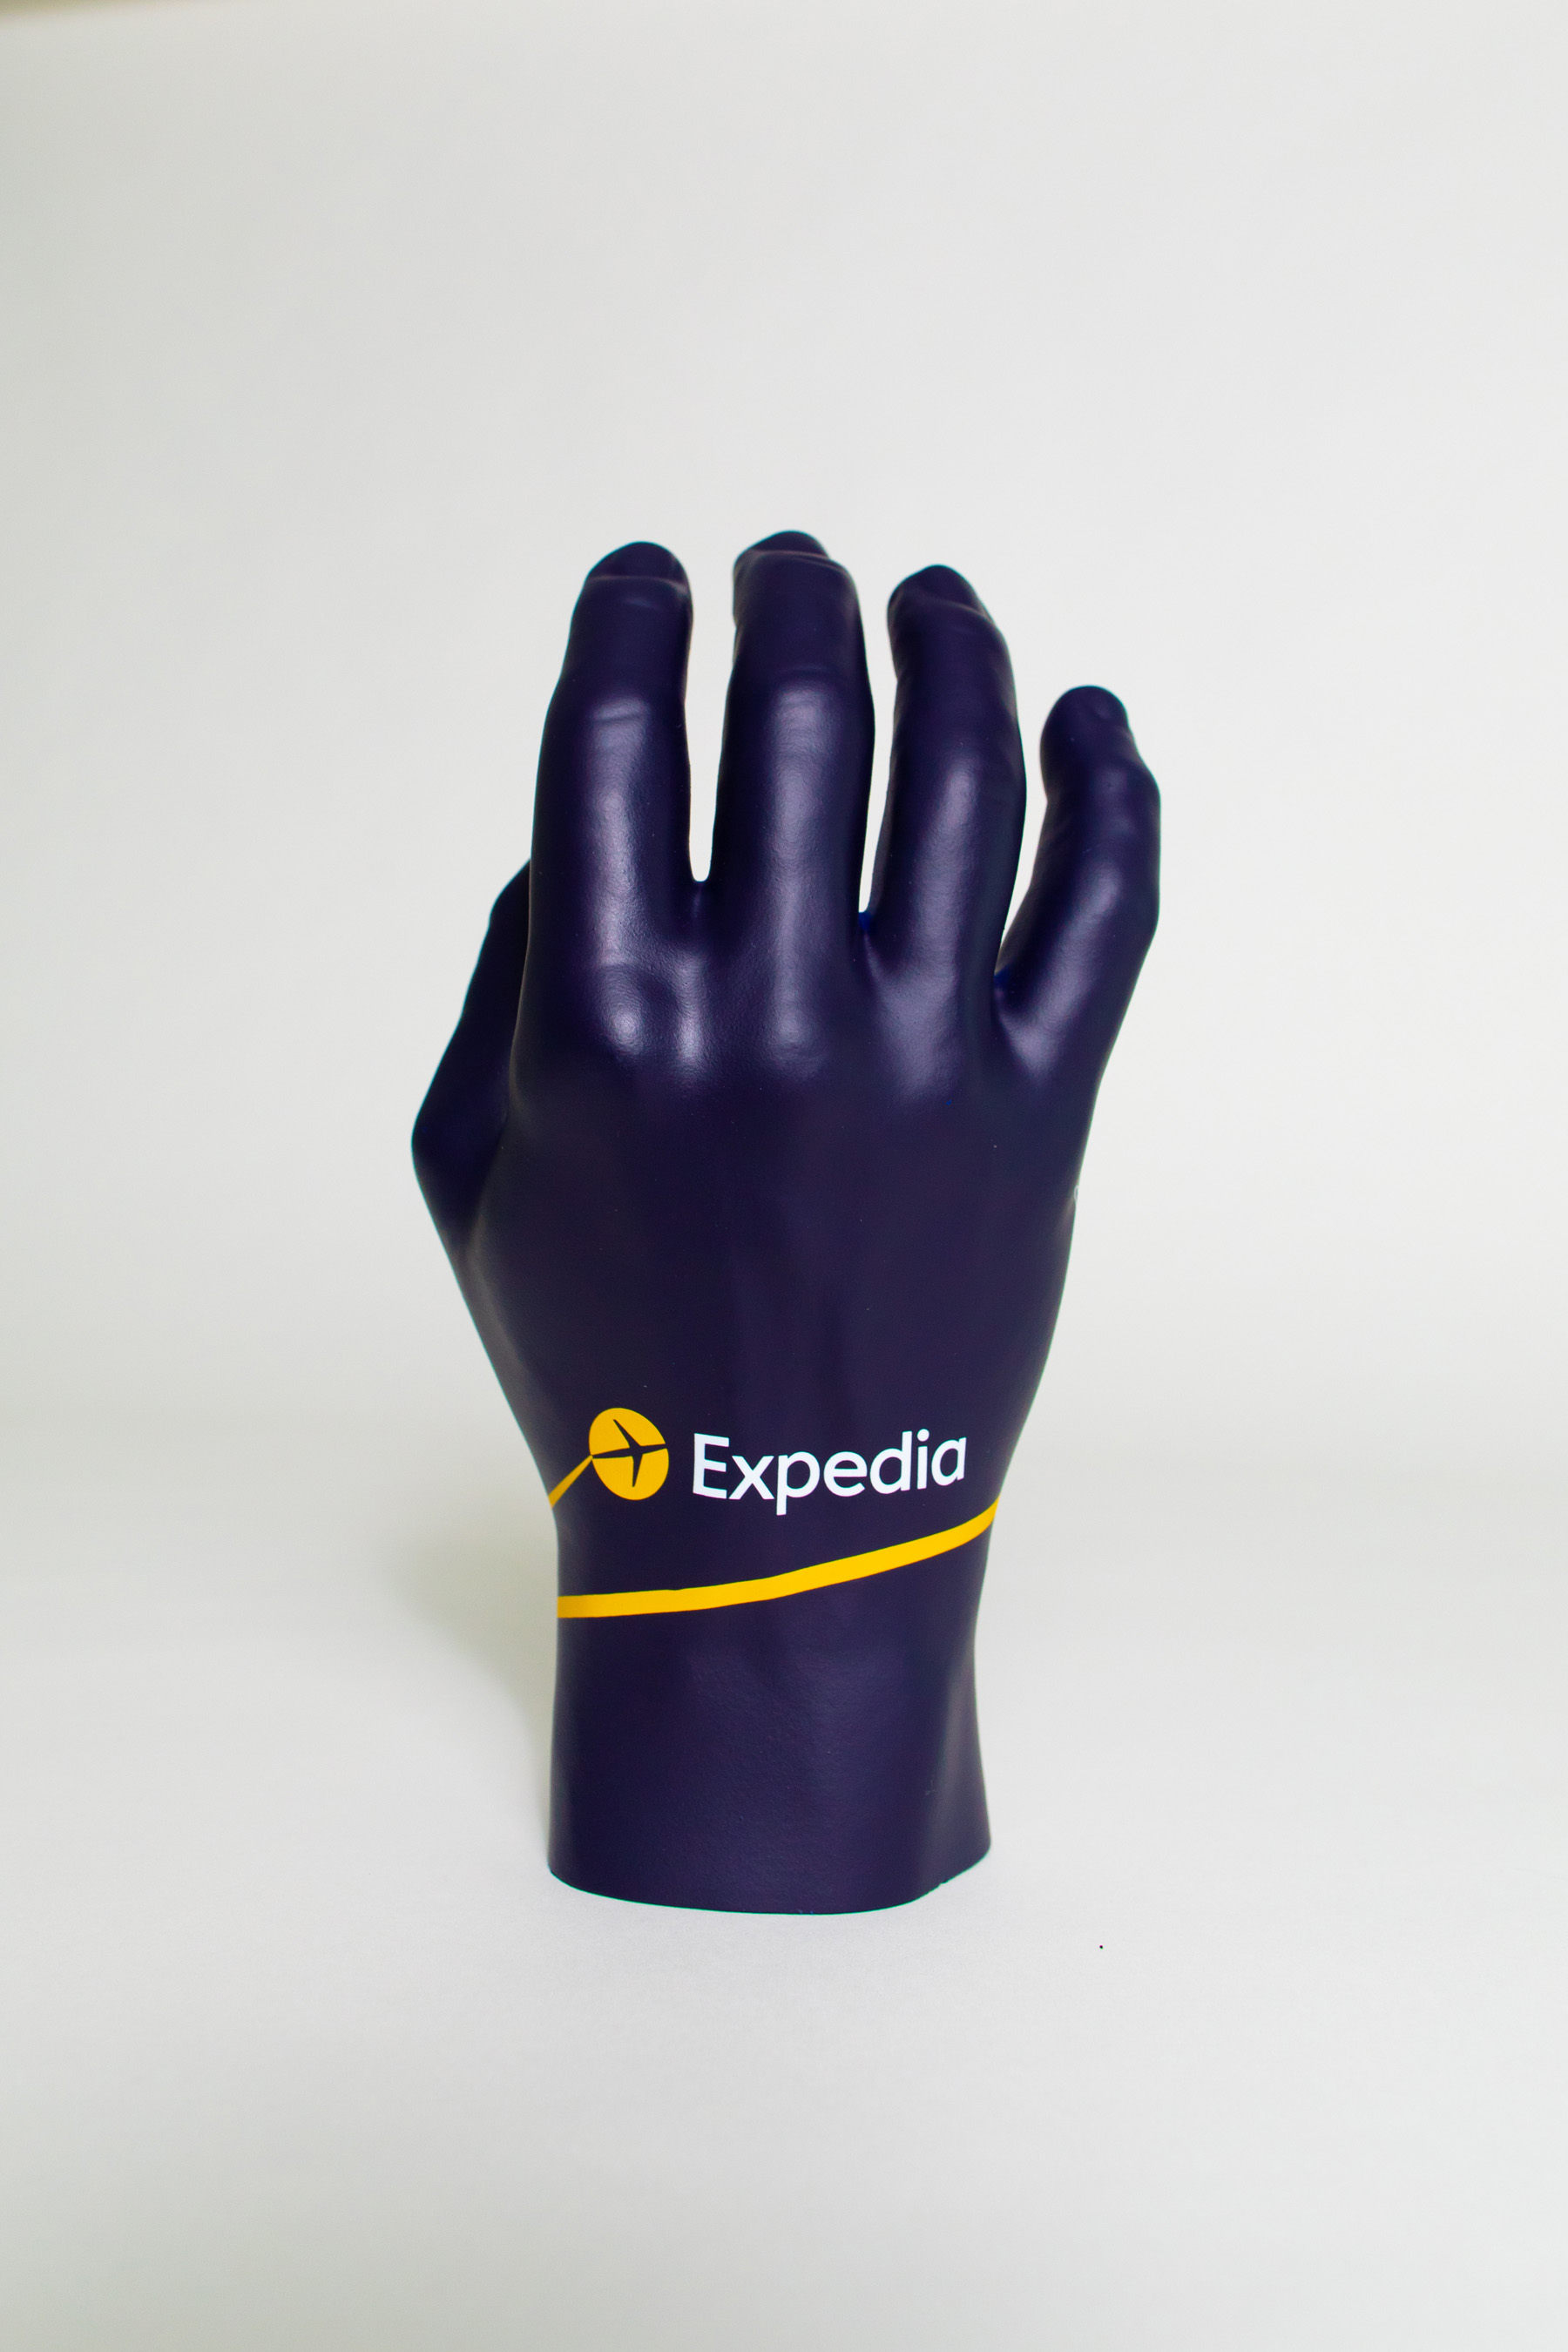 Expedia Helping Hand